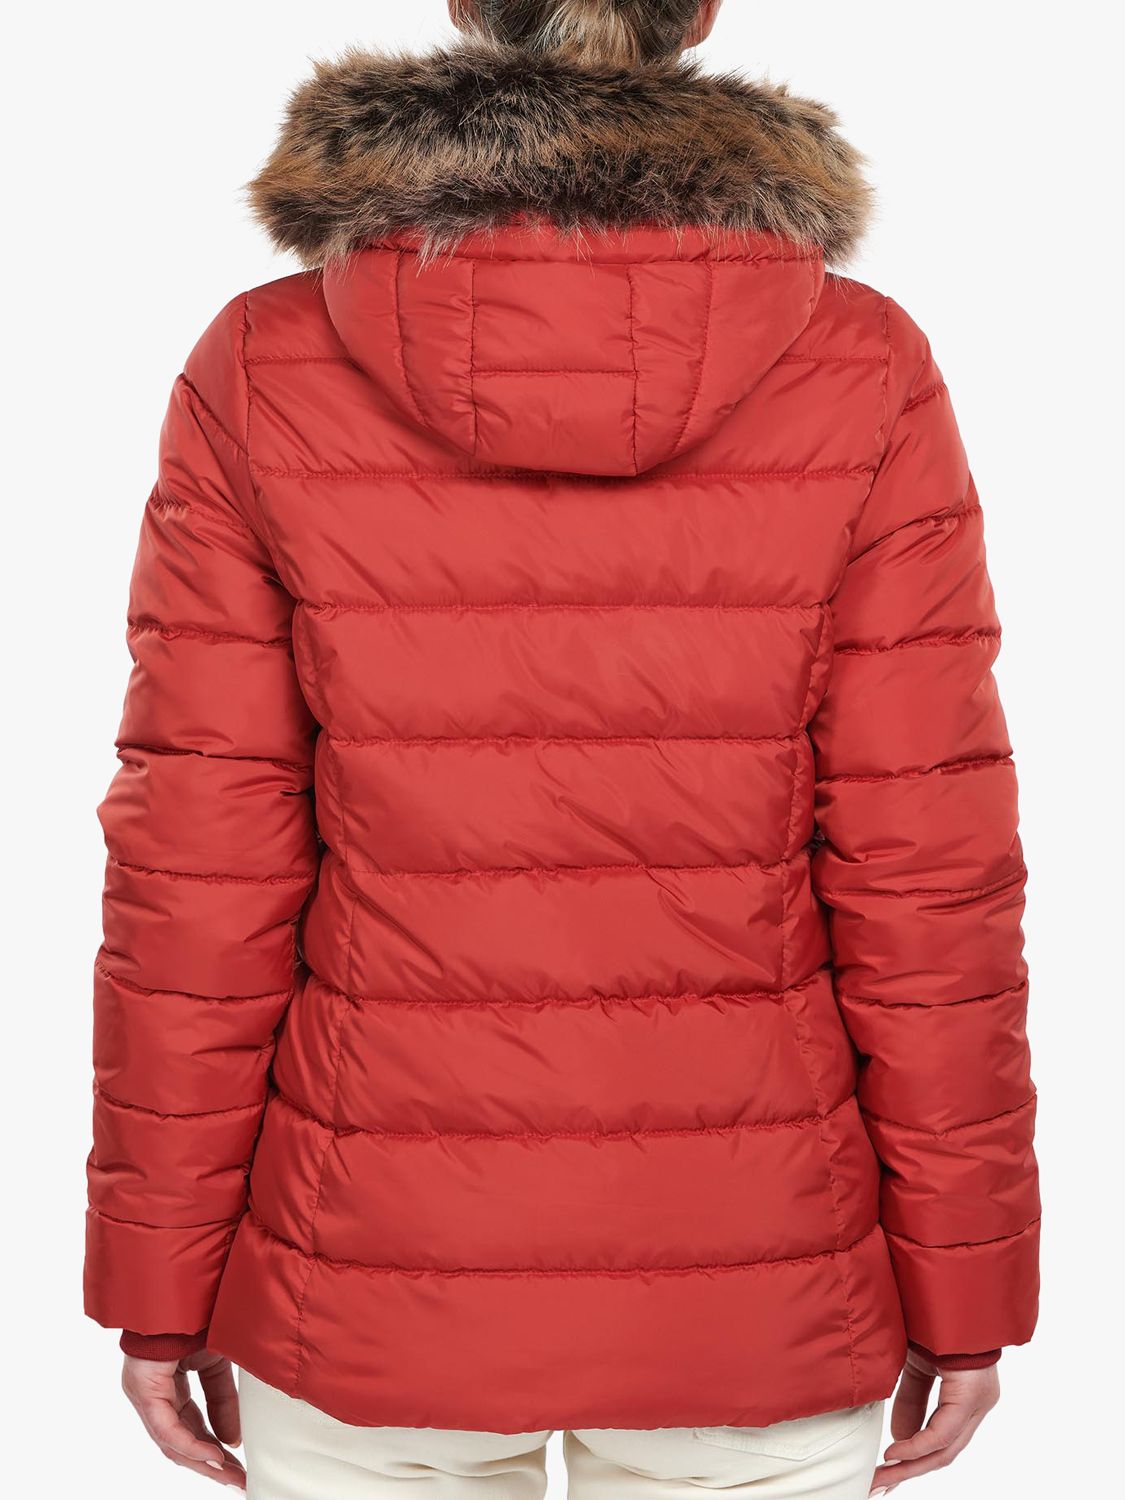 Barbour Hailey Faux Fur Hood Quilted Jacket, Flame Red at John Lewis ...